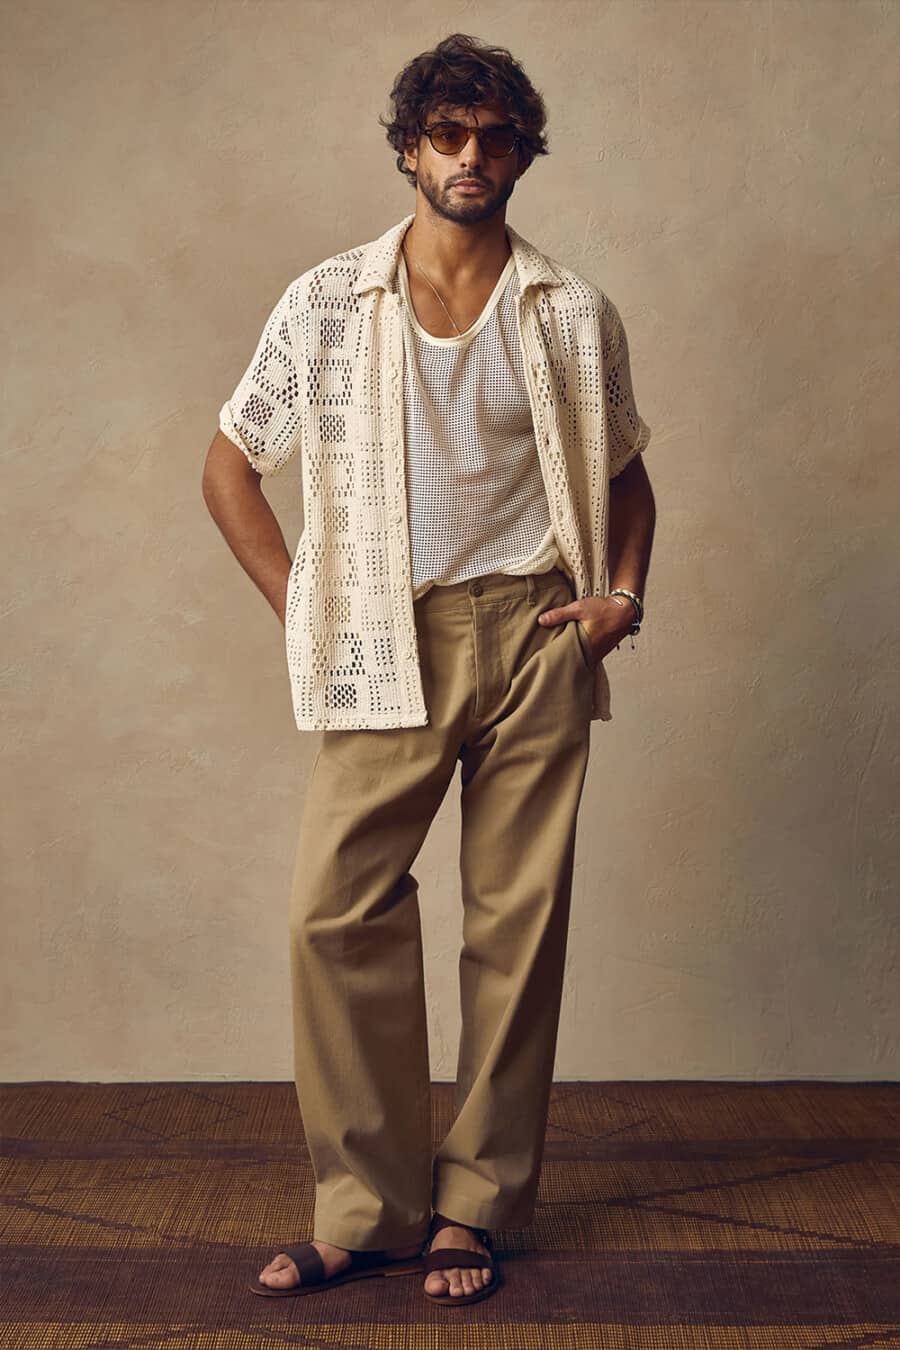 Men's loose brown pants, off-white knitted vest, crochet white short sleeve shirt and brown leather sandals outfit